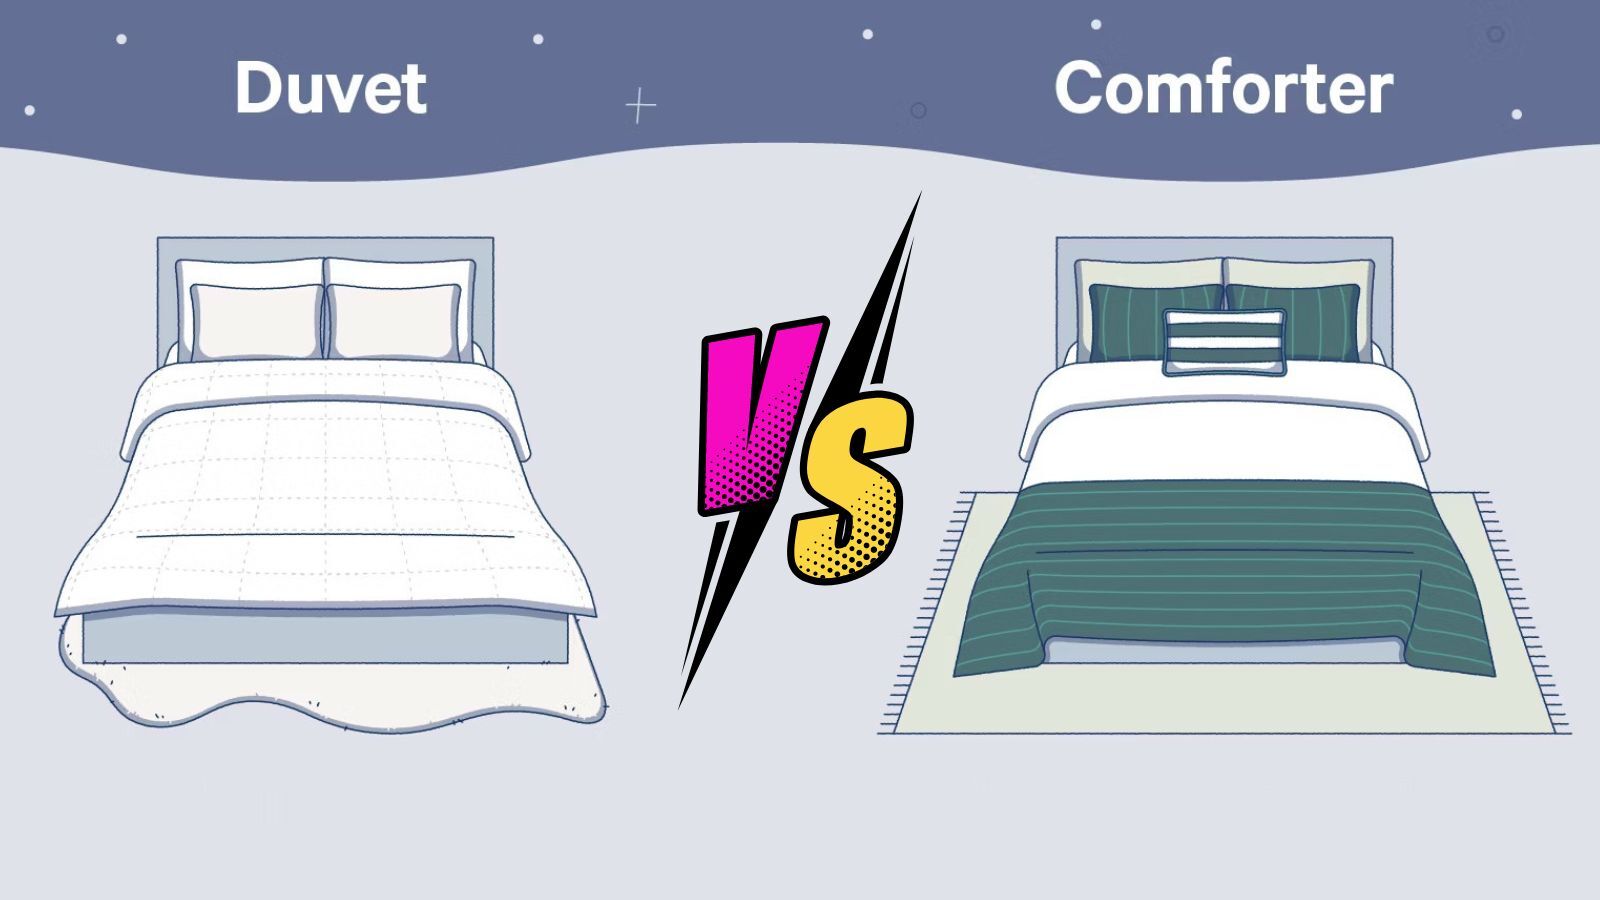 Duvets vs Comforters: Which One Would You Choose?